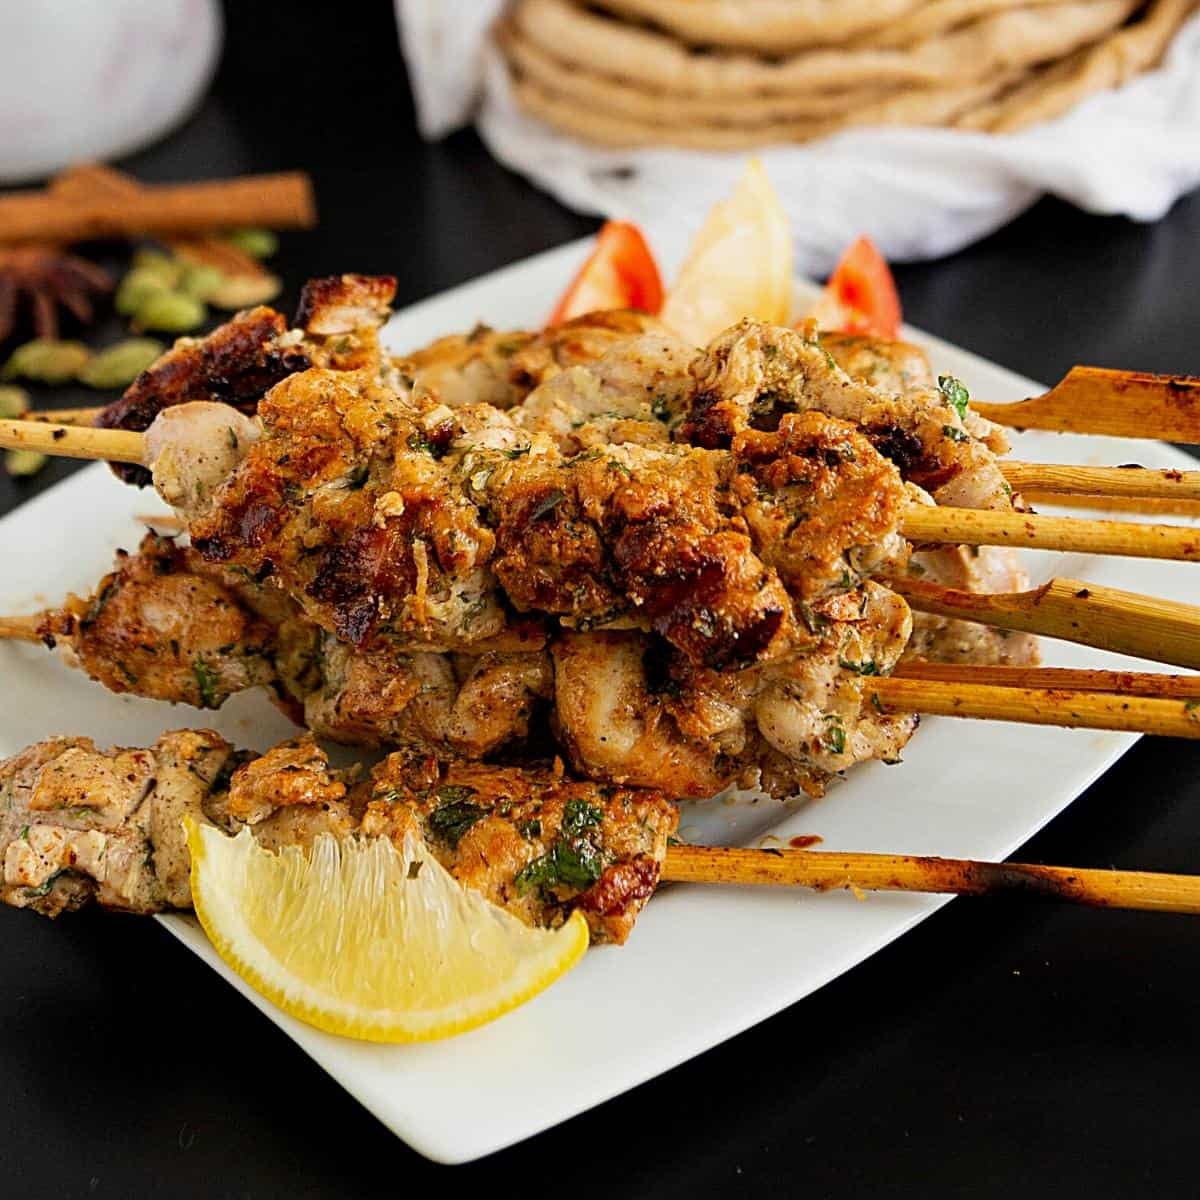 Indian Malai Chicken Skewers on the plate.